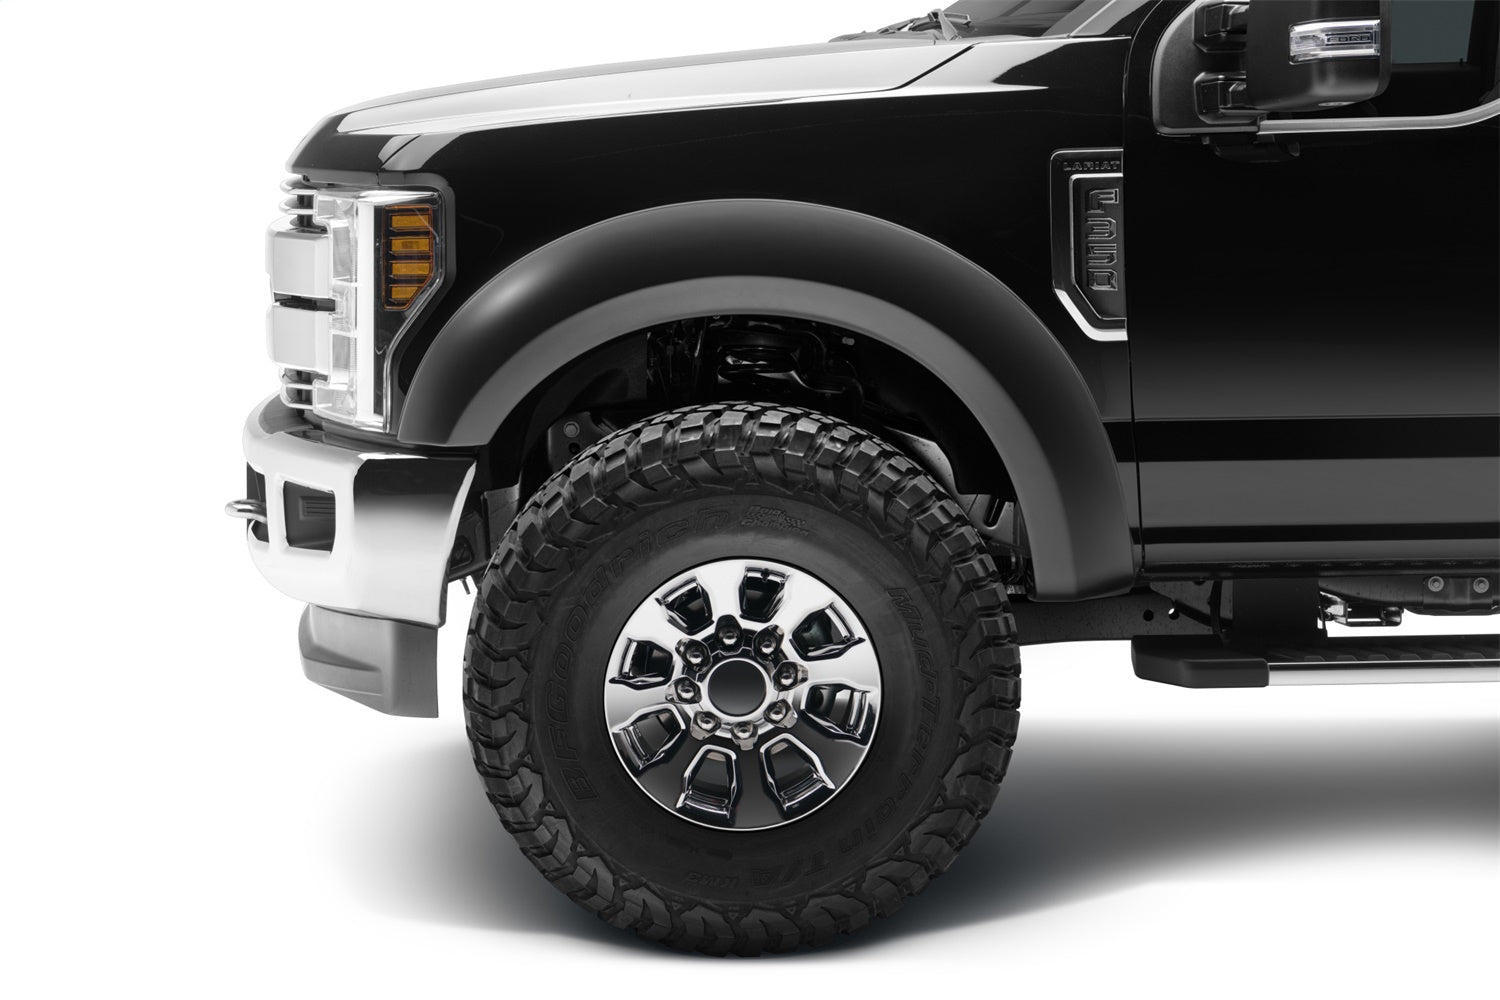 Bushwacker 20087-02 Black Extend-A-Fender Style Smooth Finish Front Fender Flares for 2017-2021 Ford F-250, F-350, F-450 Super Duty